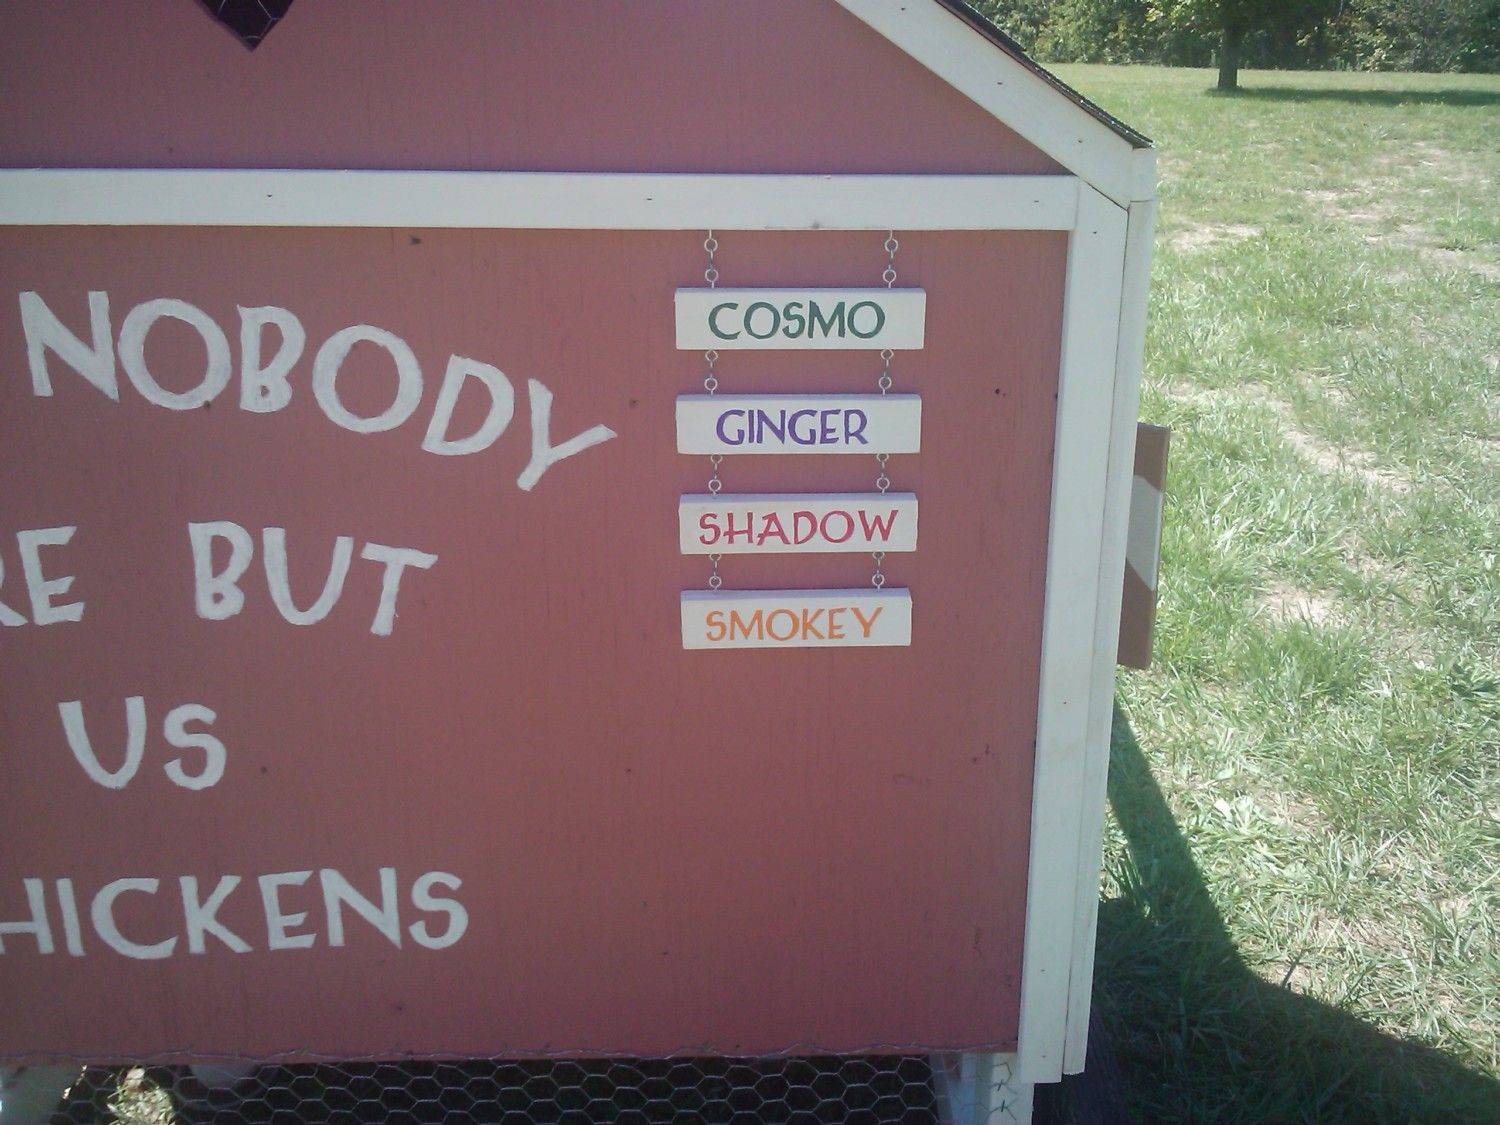 All the chickens names listed: Cosmo, Ginger, Shadow and Smokey